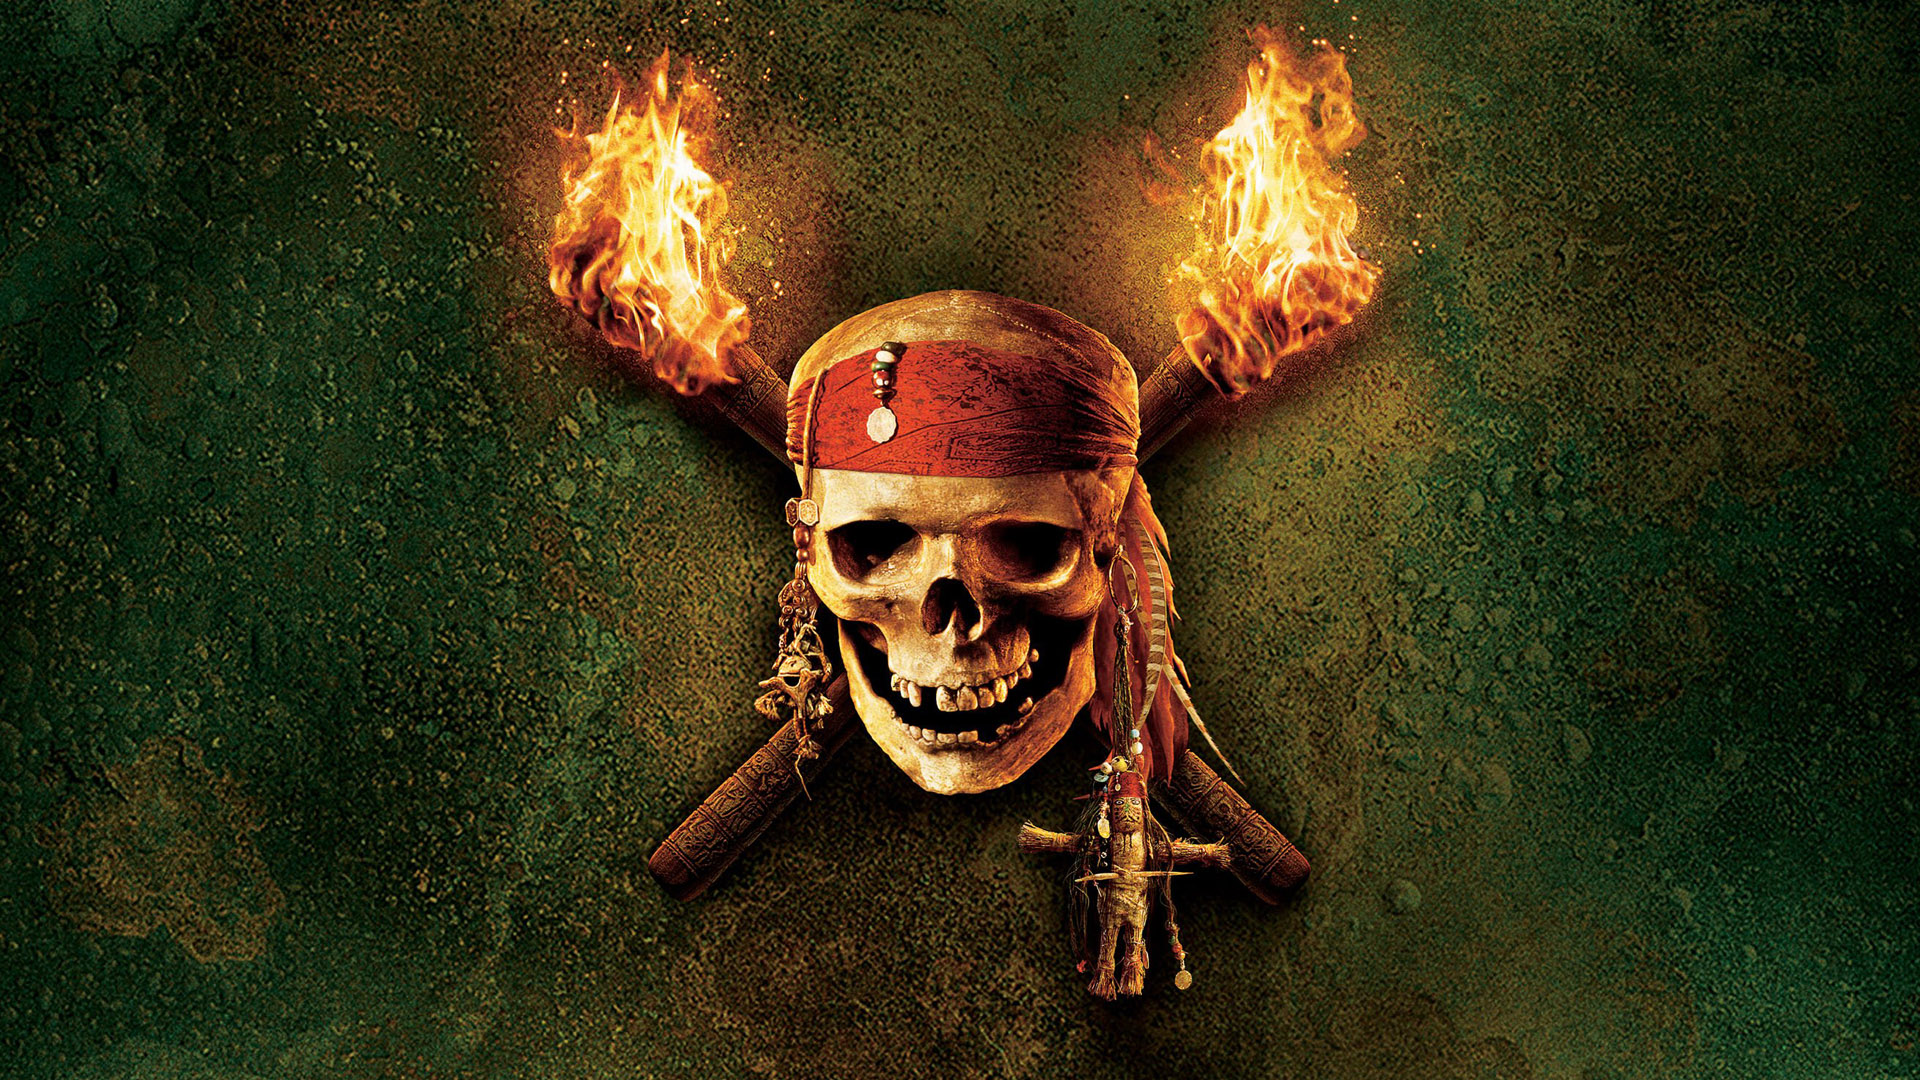 instal the last version for ipod Pirates of the Caribbean: Dead Man’s